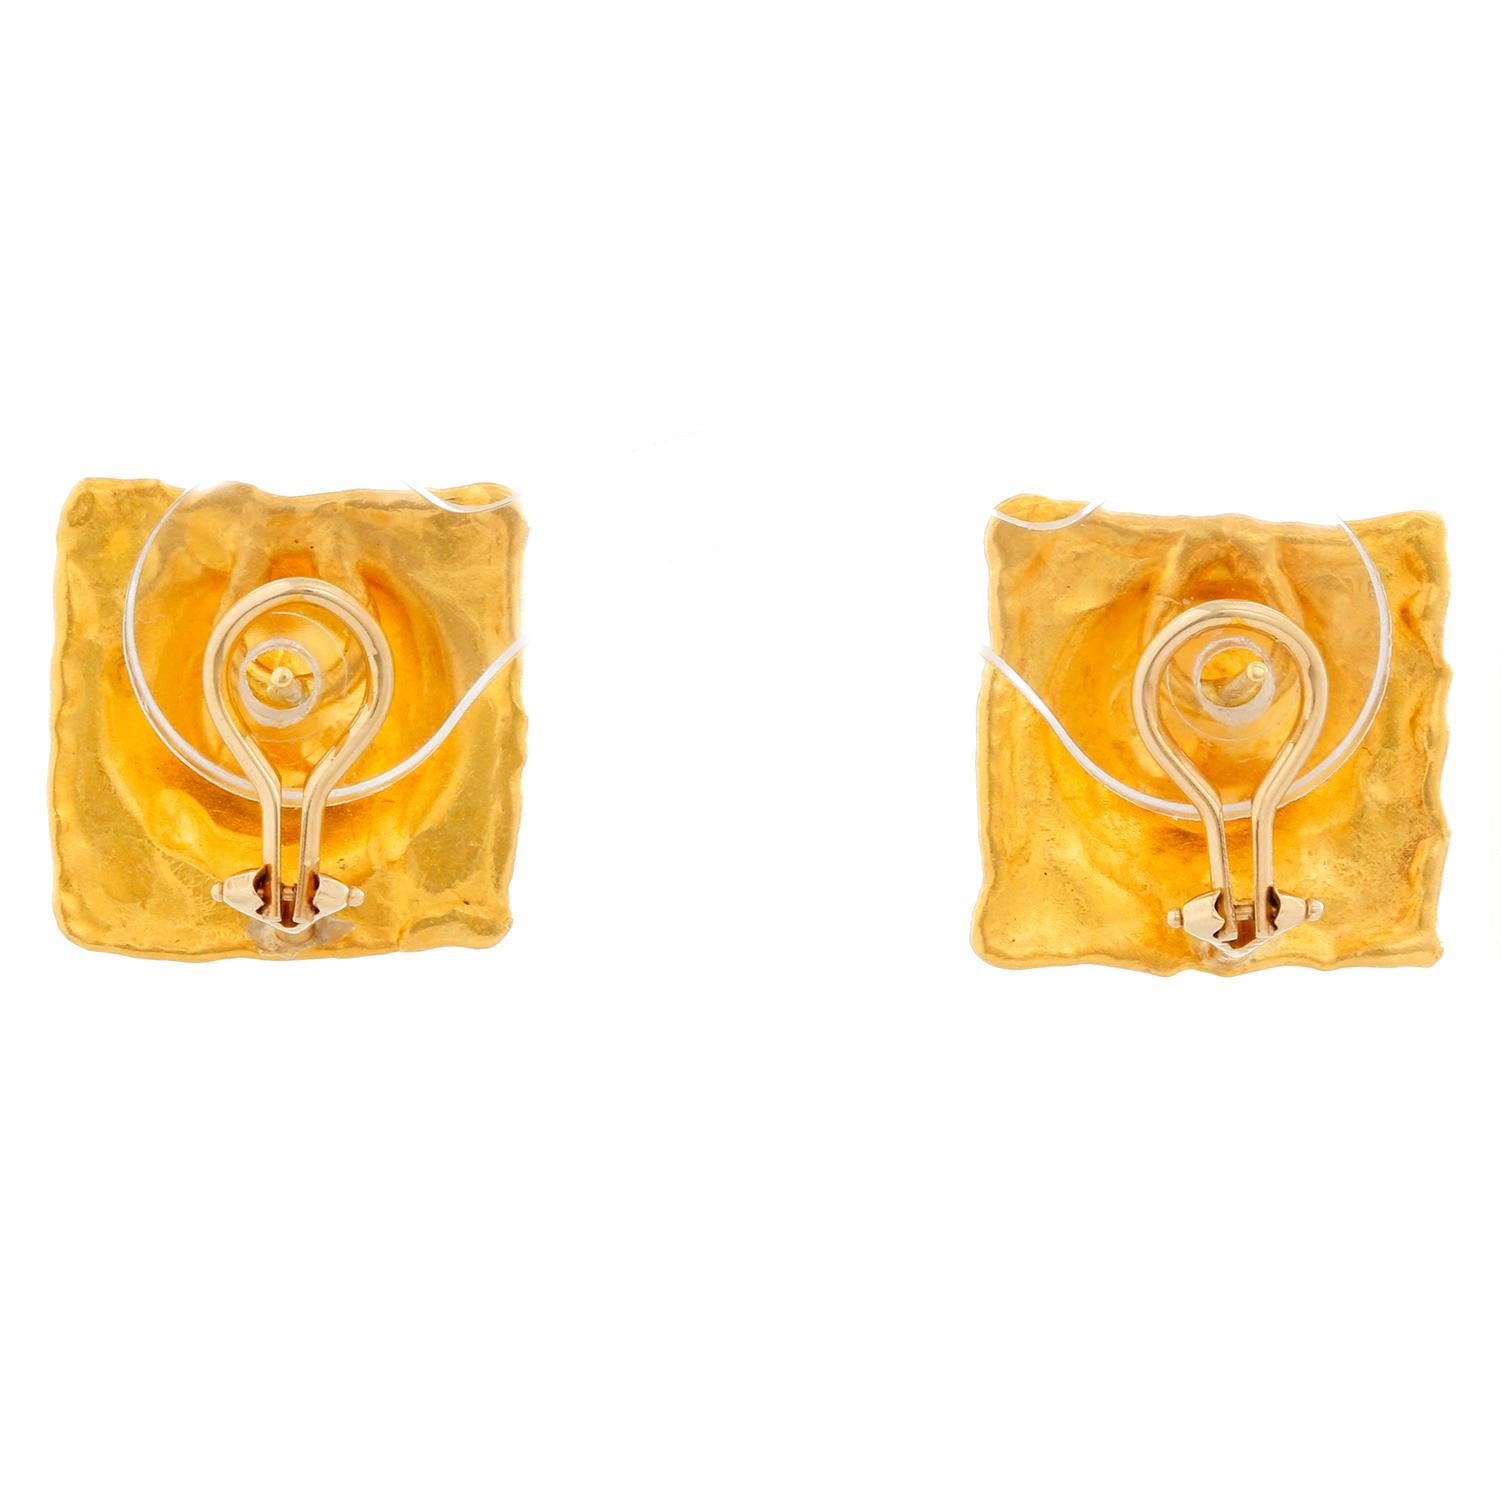 Jean Mahie 22K Square Earrings - Off square design and textured bombe centers, crafted out of 22K yellow gold; each ear clip measures 2.5 x 2.5 cm; weight 20.5g. Signed JM for Jean Mahie; Stamped 22K. Pre-owned with custom box. 